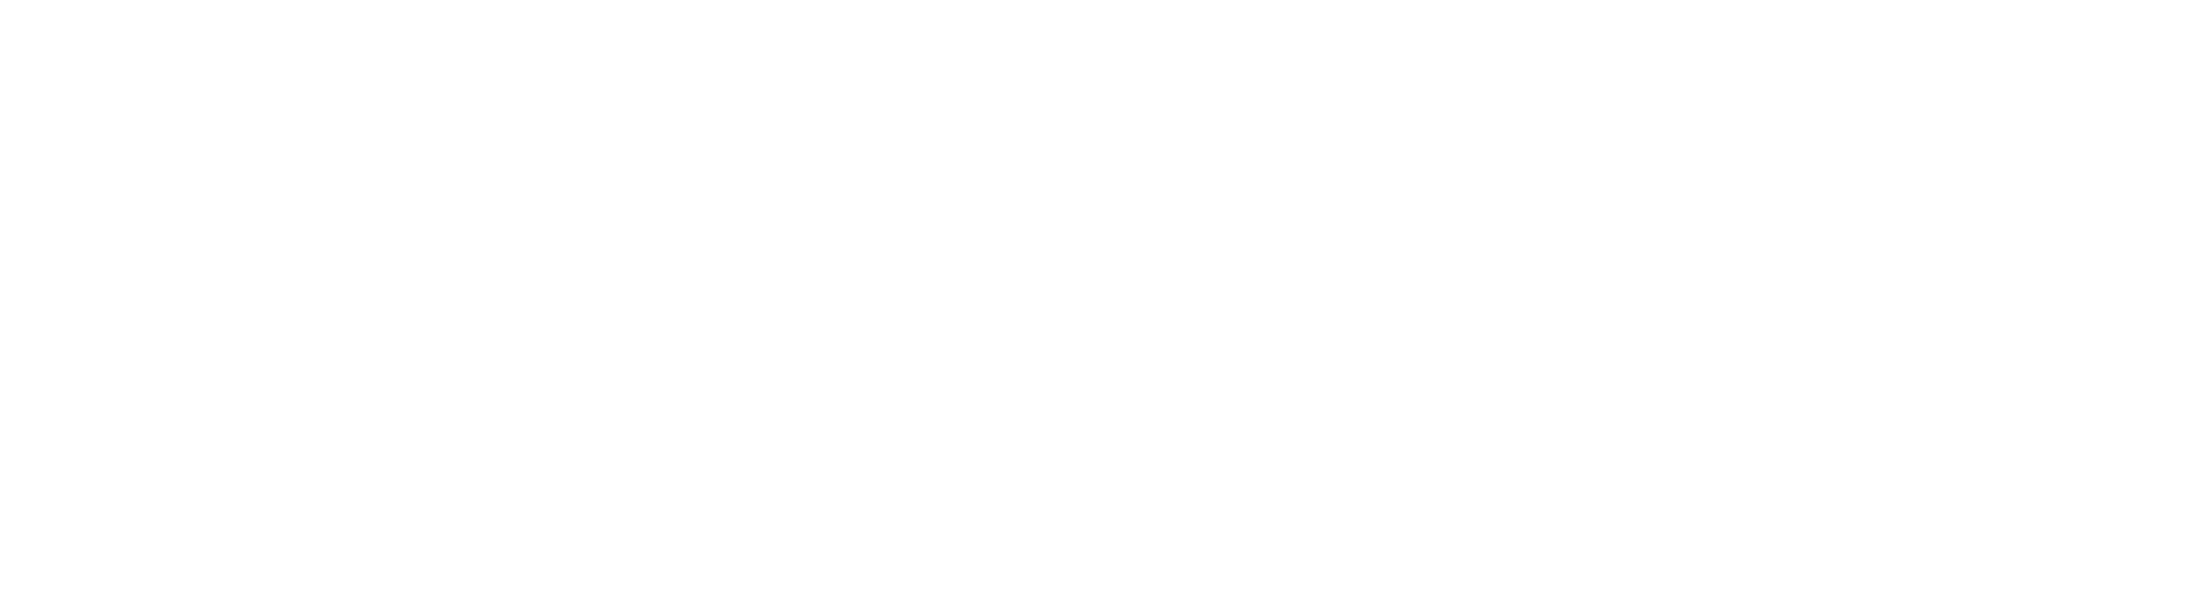 296-samsung-electronics-logo-black-and-white-16826358969126.png